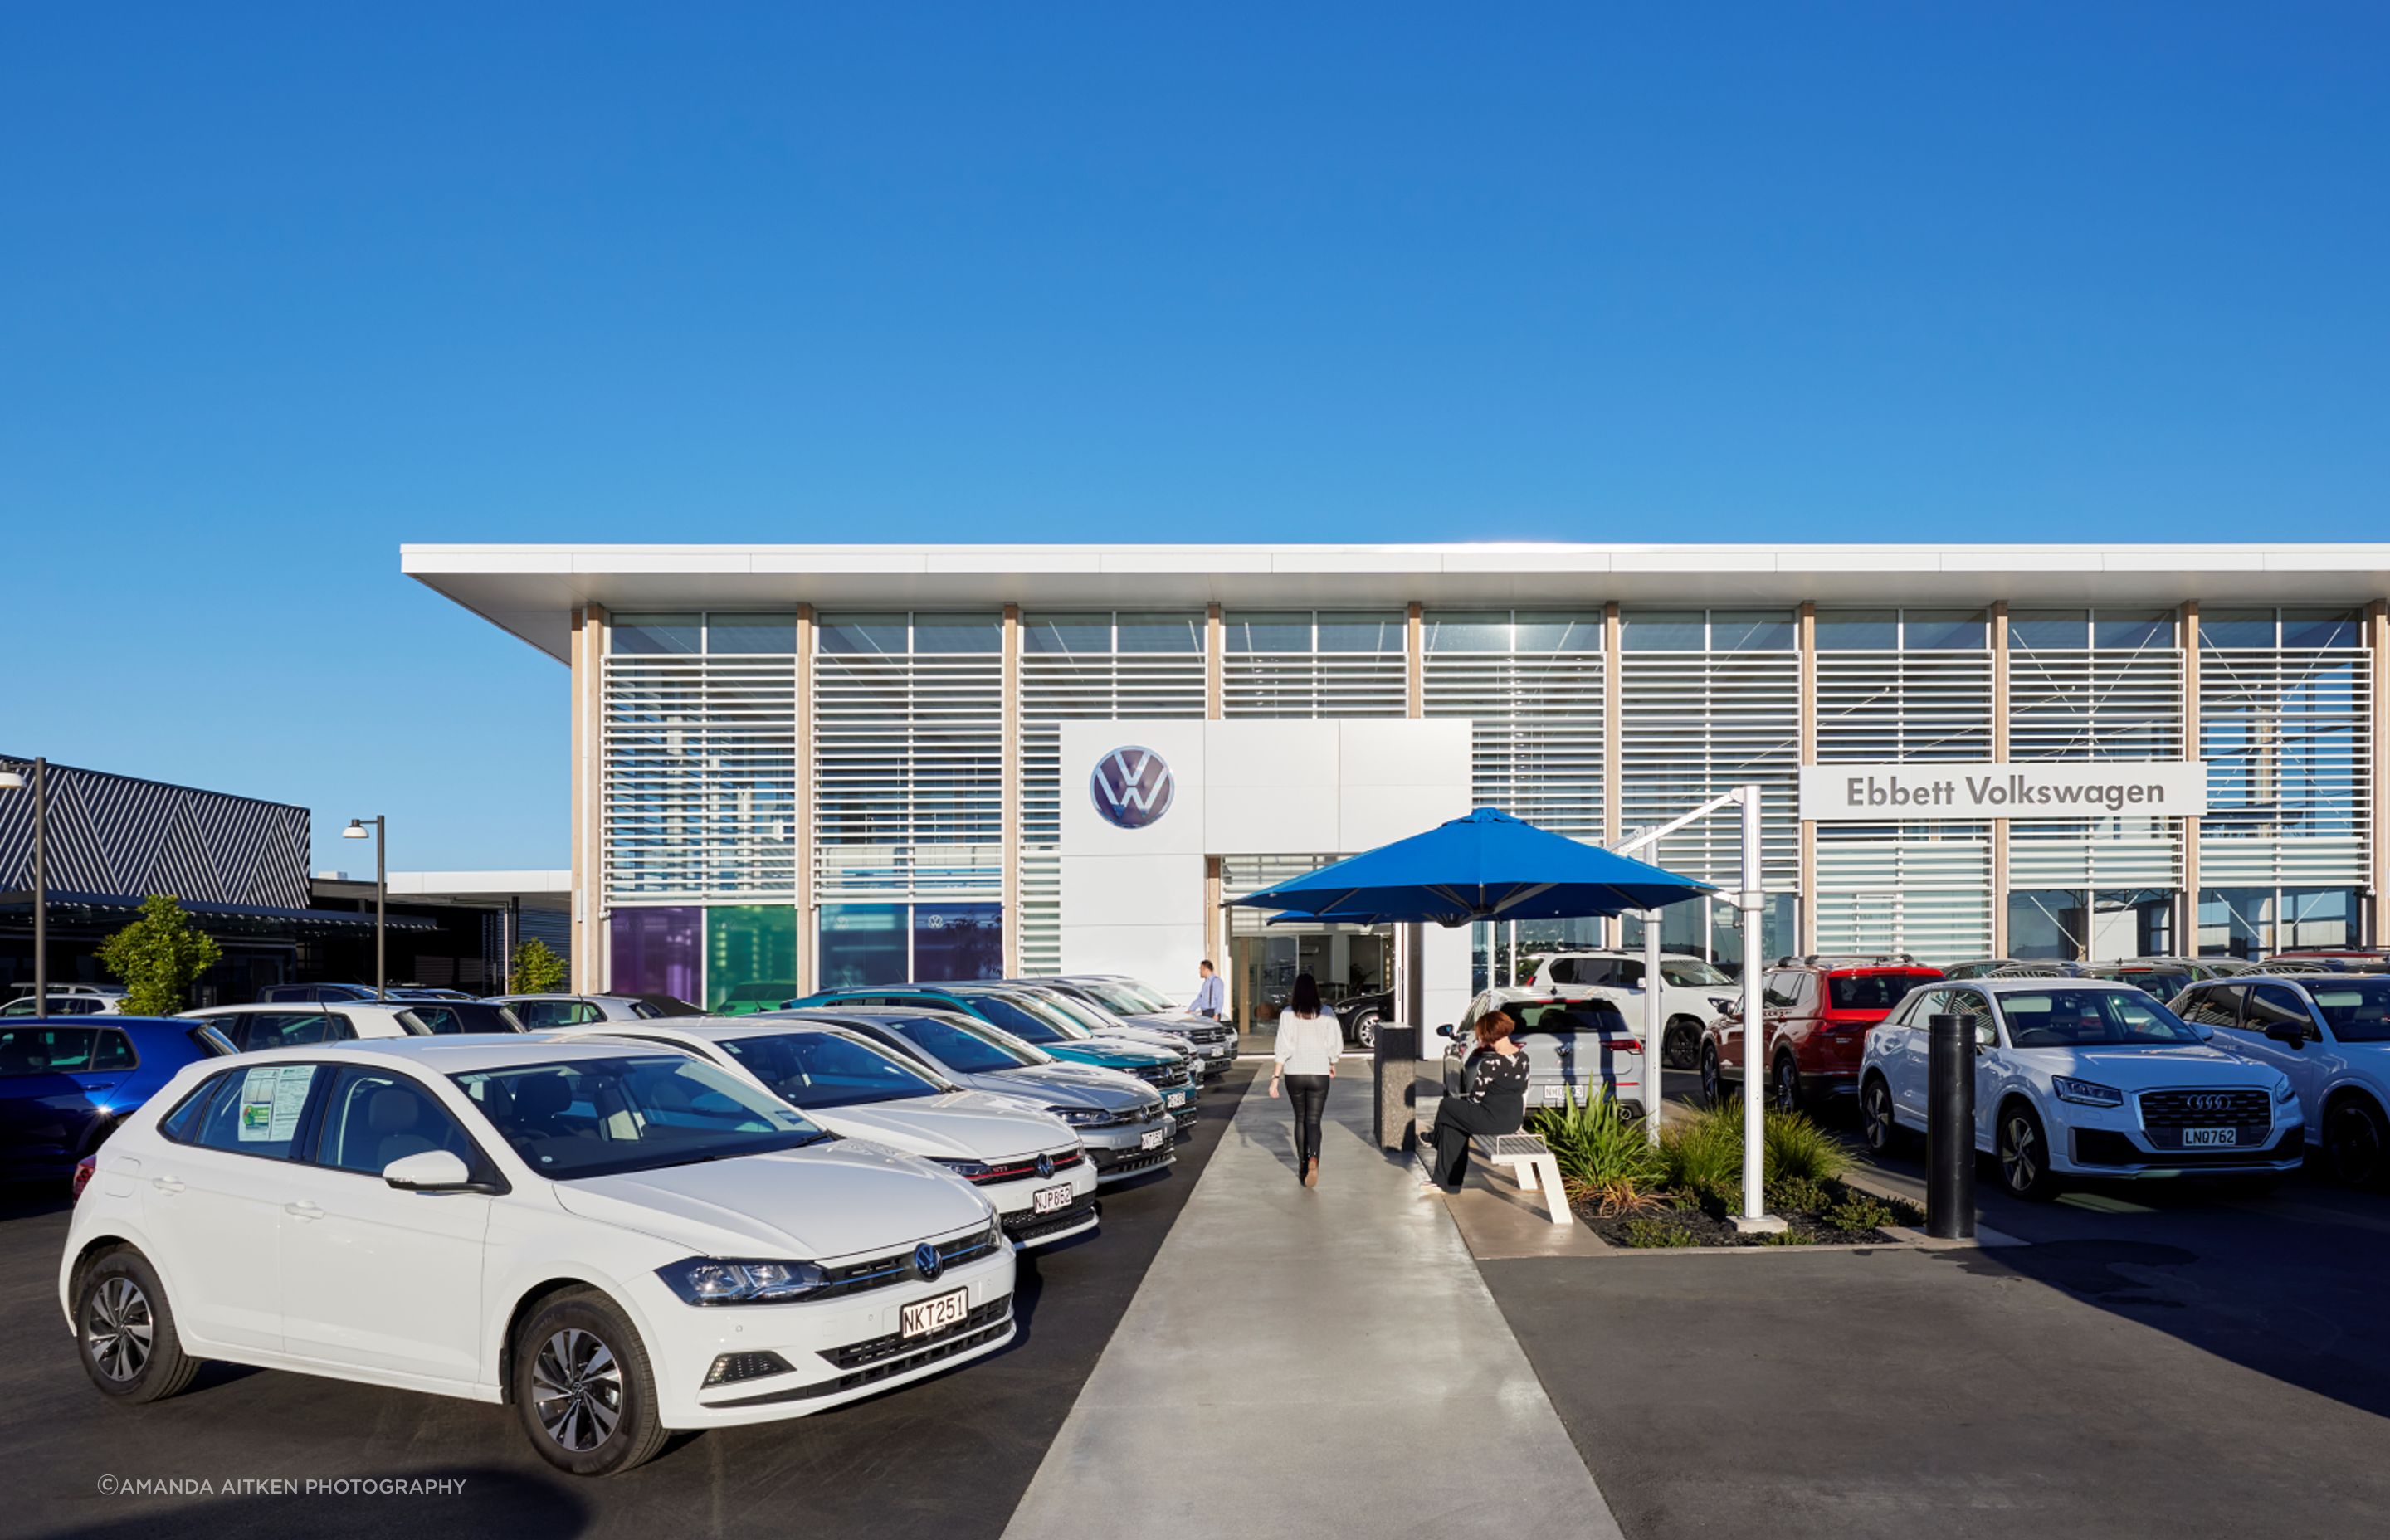 The Volkswagen dealership has a pale and Scandi-inspired design identity.